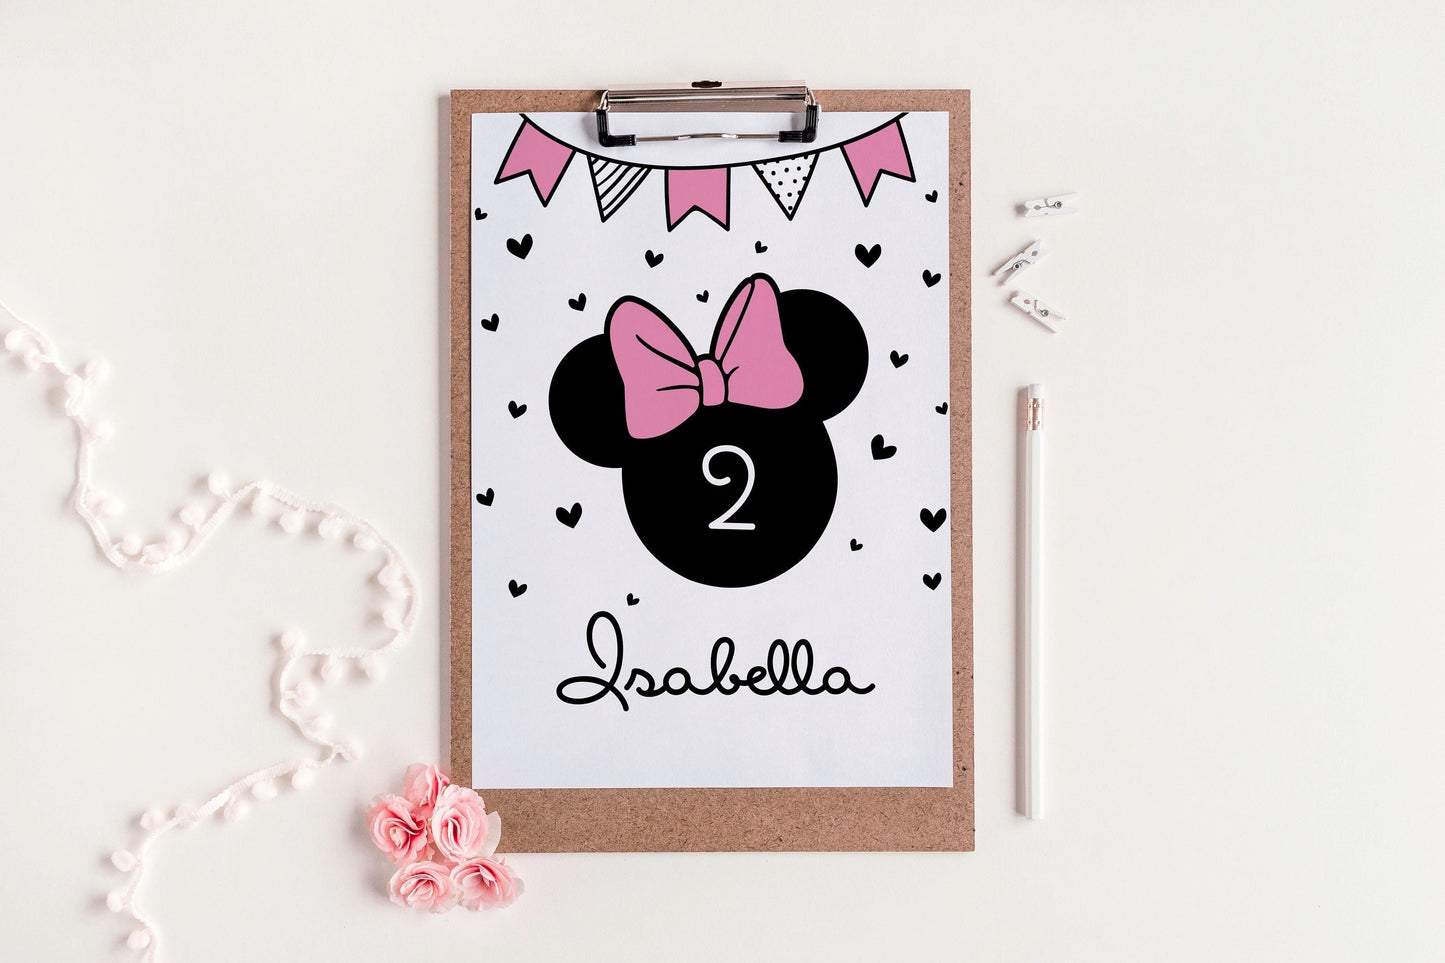 Minnie Mouse Table Sign 8x10" ★ Instant Download | Editable Text - Digitally Printables